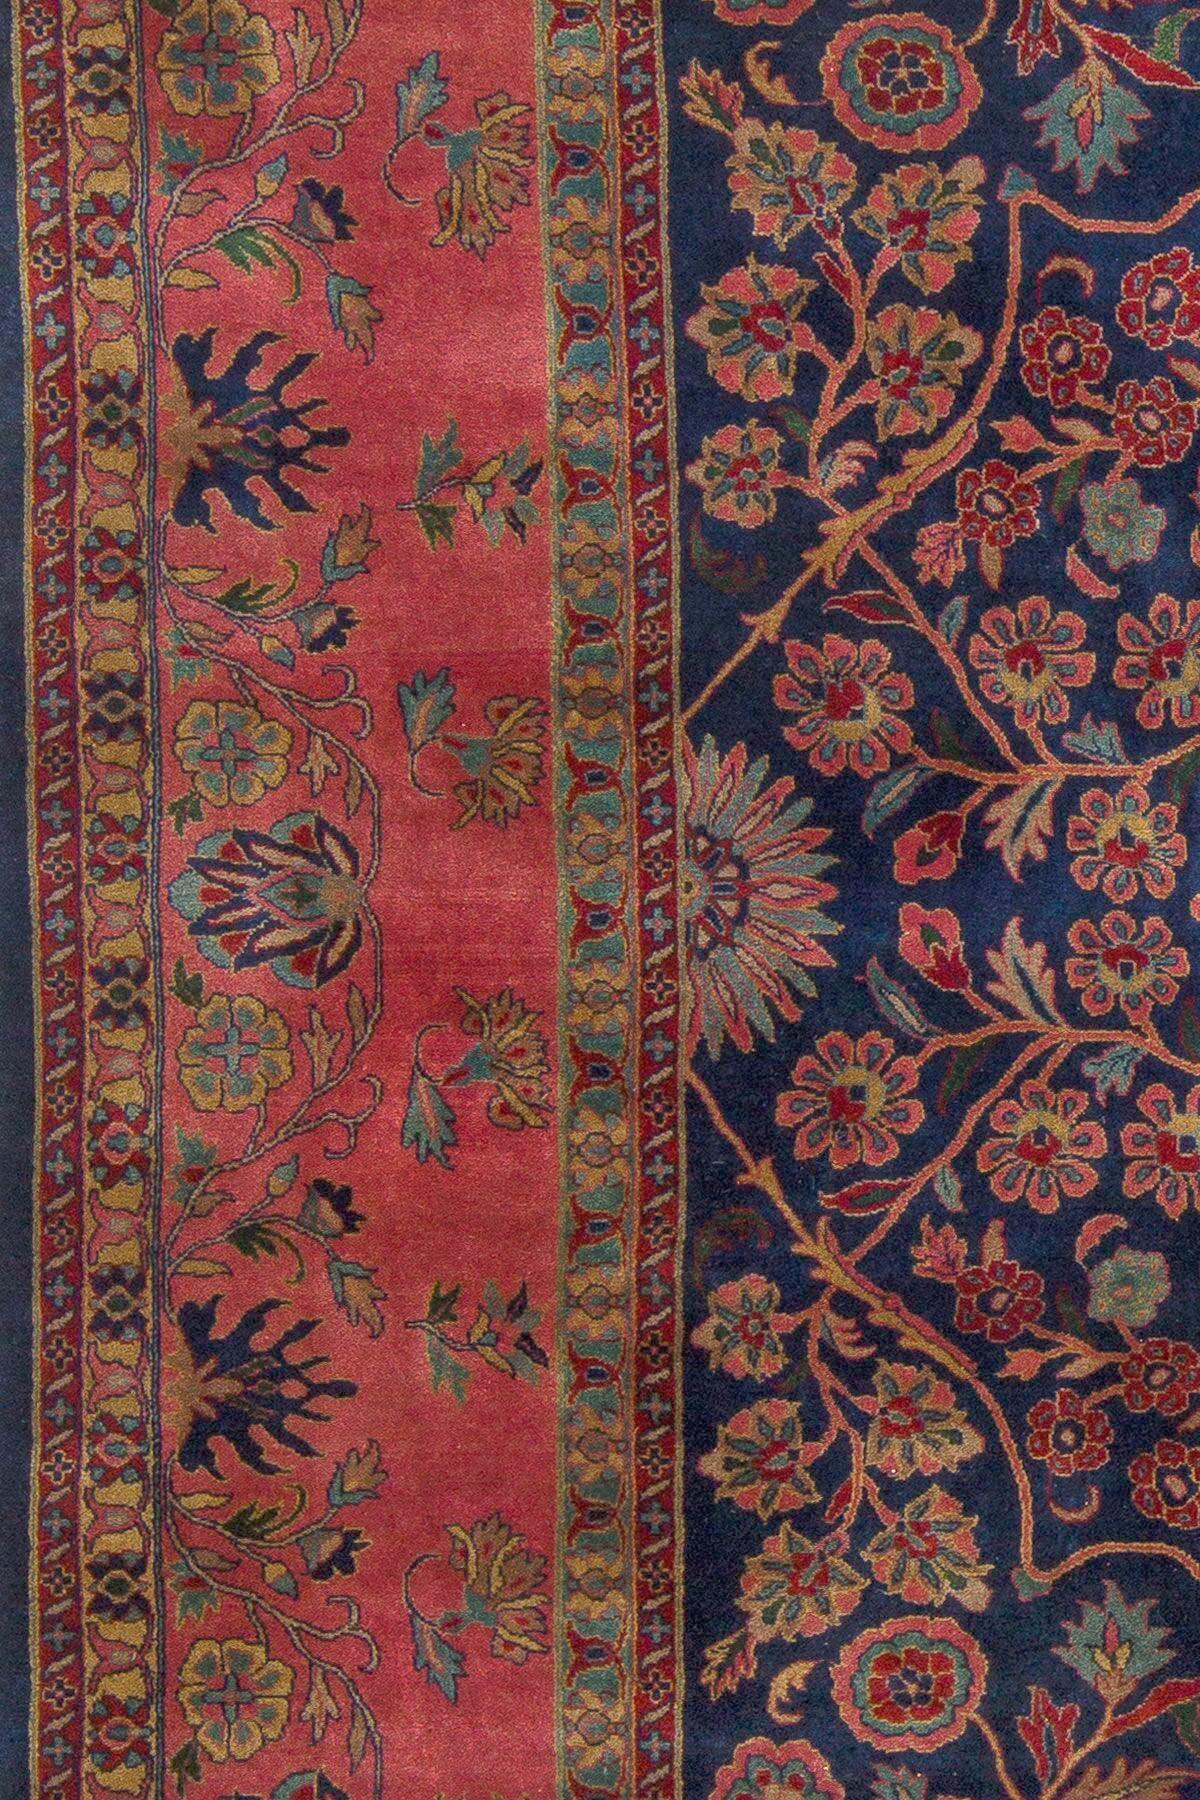 An early 20th century antique Indo Sarouk rug woven with rich lustrous wool.

This rug was woven in northern India from an example of a antique Persian sarouk rug. The wool construction and patina is different, with this having a silkier sheen to